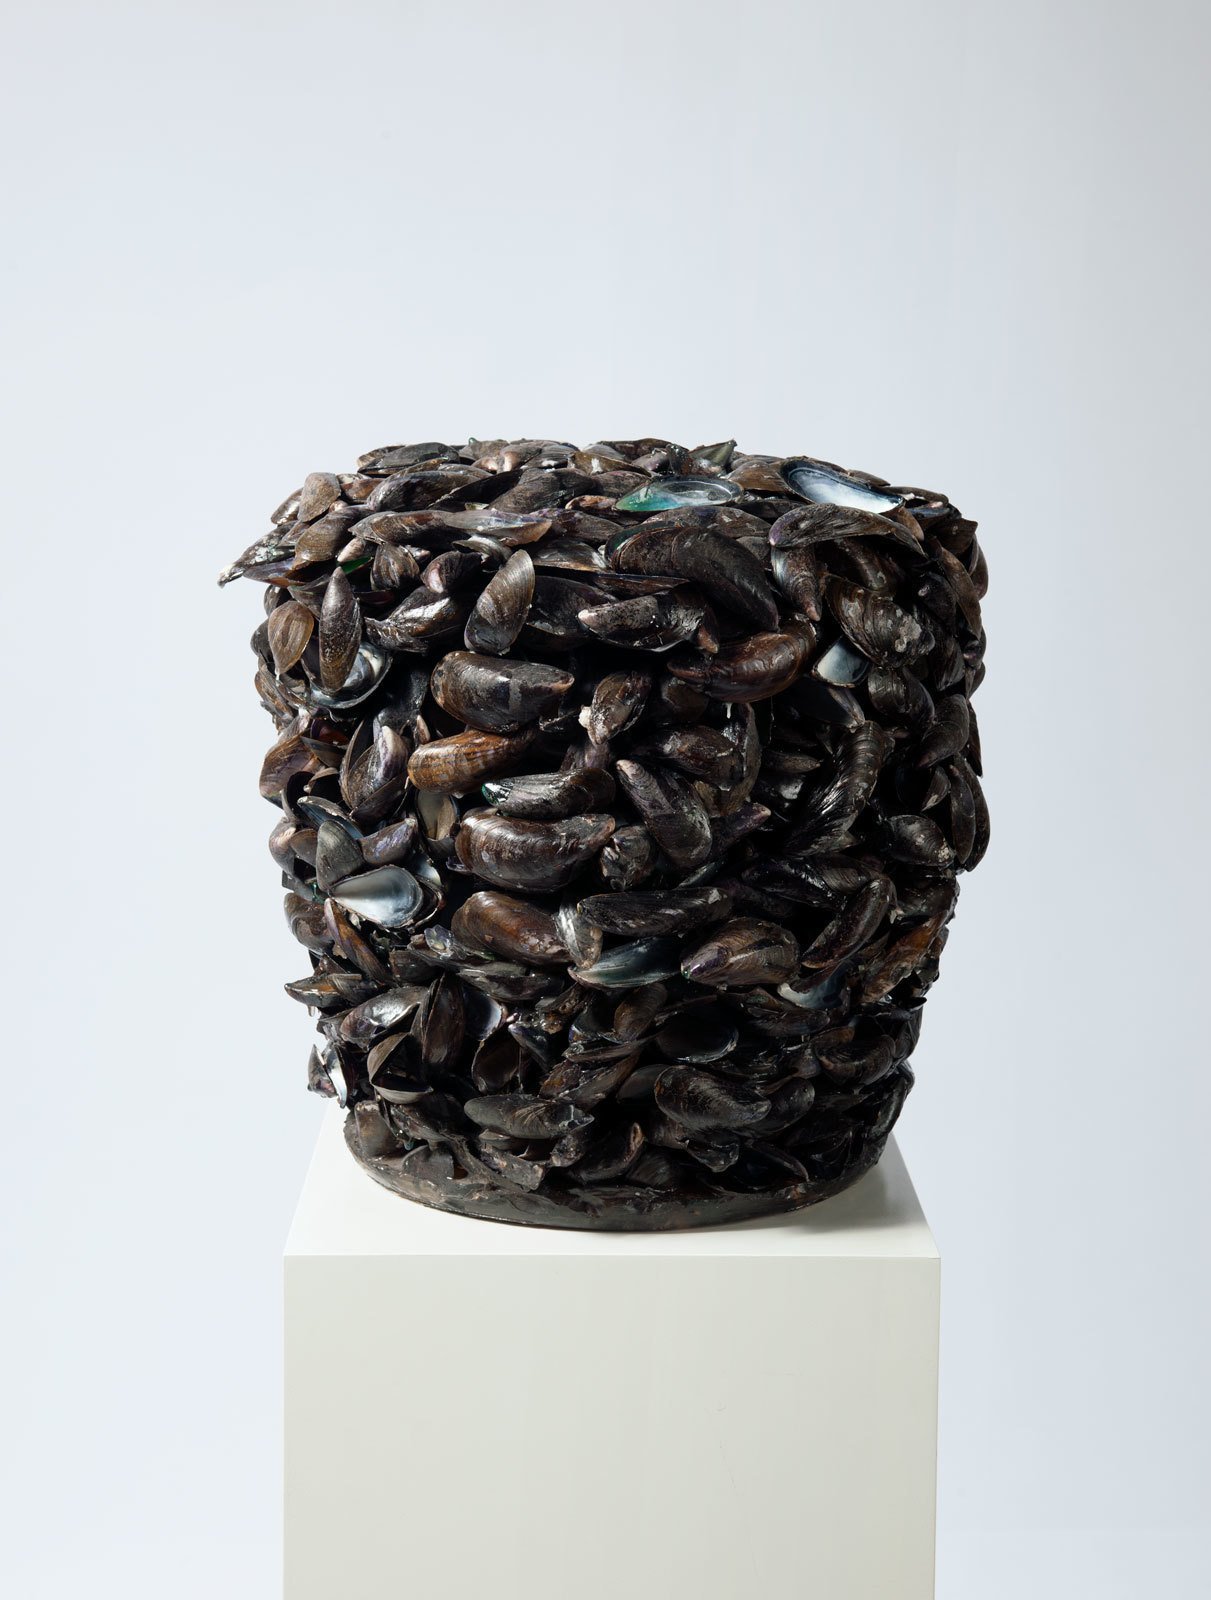 Marcel BroodthaersMoule de Moules, 1965&ndash;1966(Mussel Mould)Coloured resin and mussel shells40 &times; 30 &times; 34 cmPrivate collection&copy; Estate Marcel Broodthaers